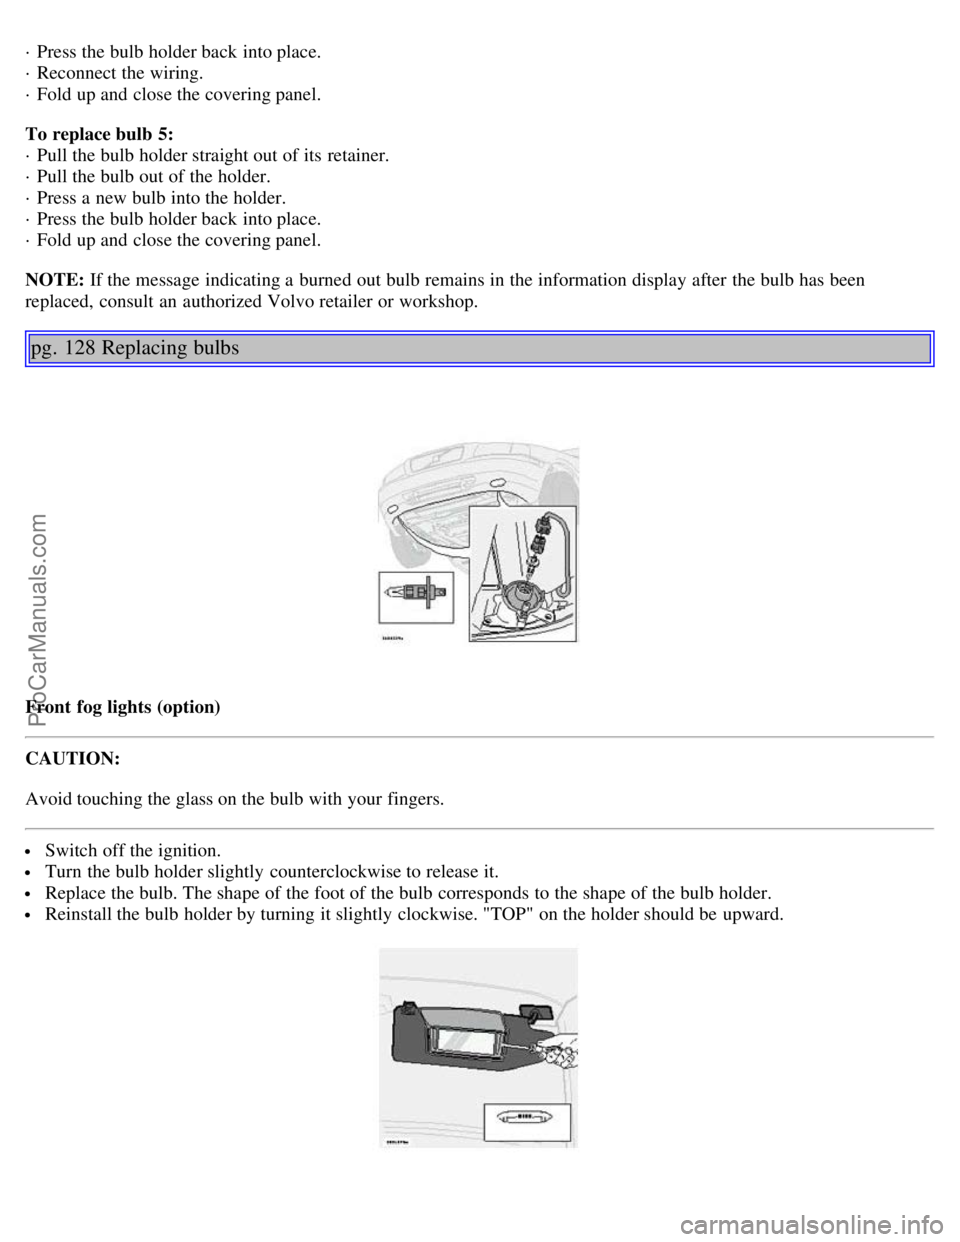 VOLVO S80 2006  Owners Manual · Press the bulb holder back into place. 
· Reconnect the wiring. 
· Fold up and  close the covering panel.
To replace bulb  5: 
· Pull the bulb holder straight out of its  retainer. 
· Pull the 